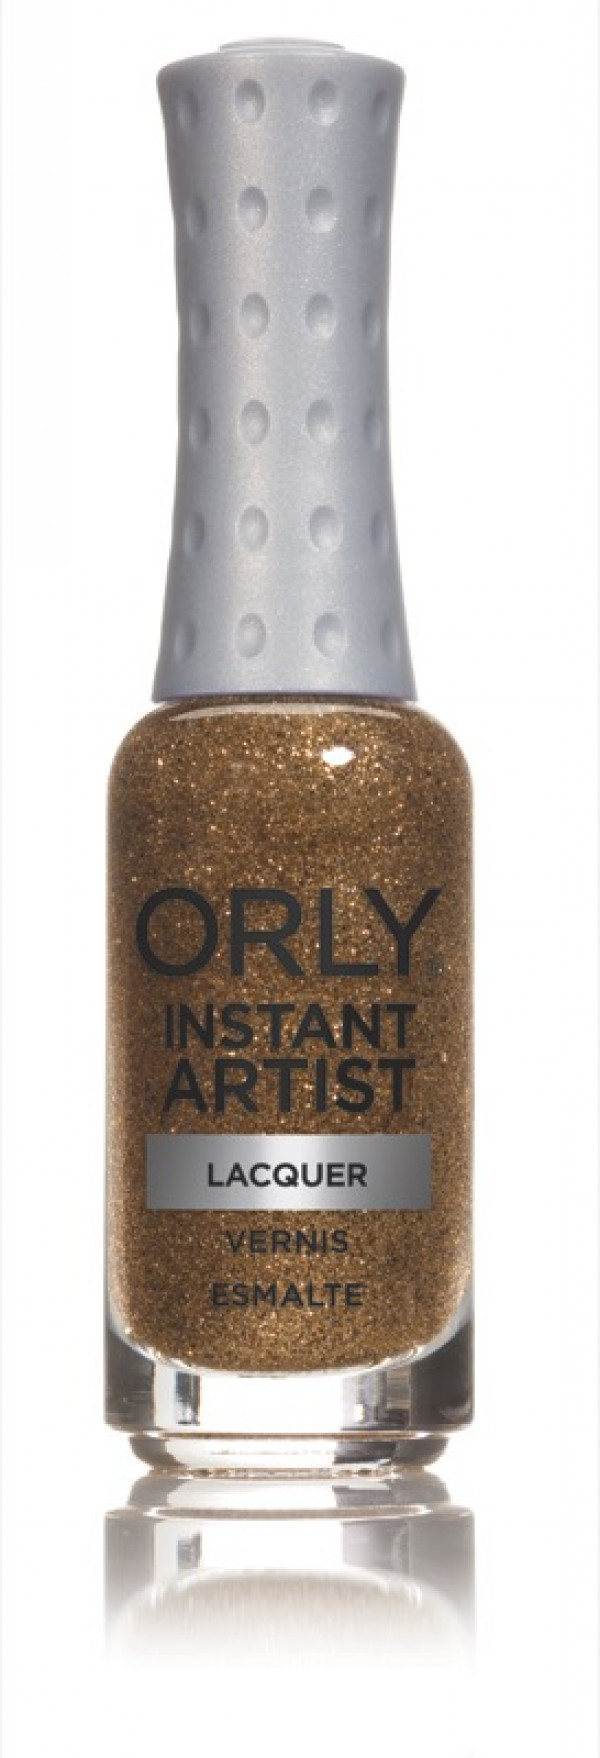 Orly Instant Artist Lacquer based, 9 ml 24K Glitte